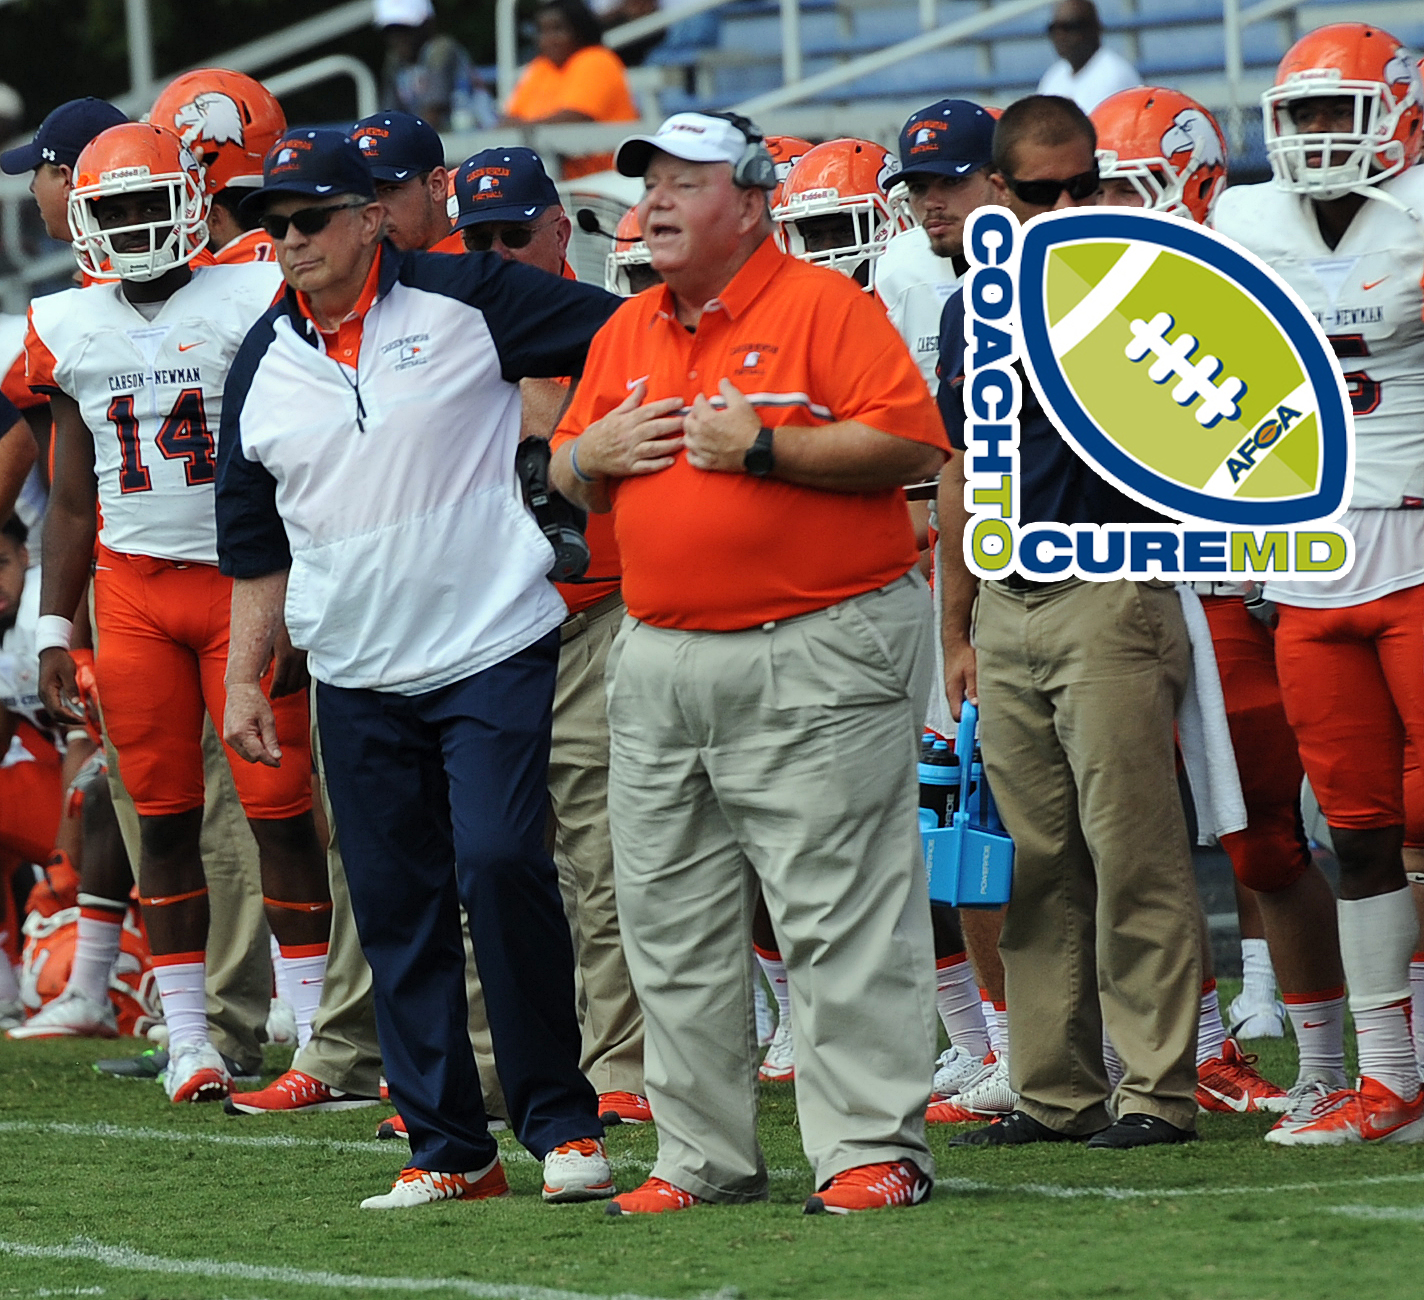 Carson-Newman football to participate in Coach To Cure MD week